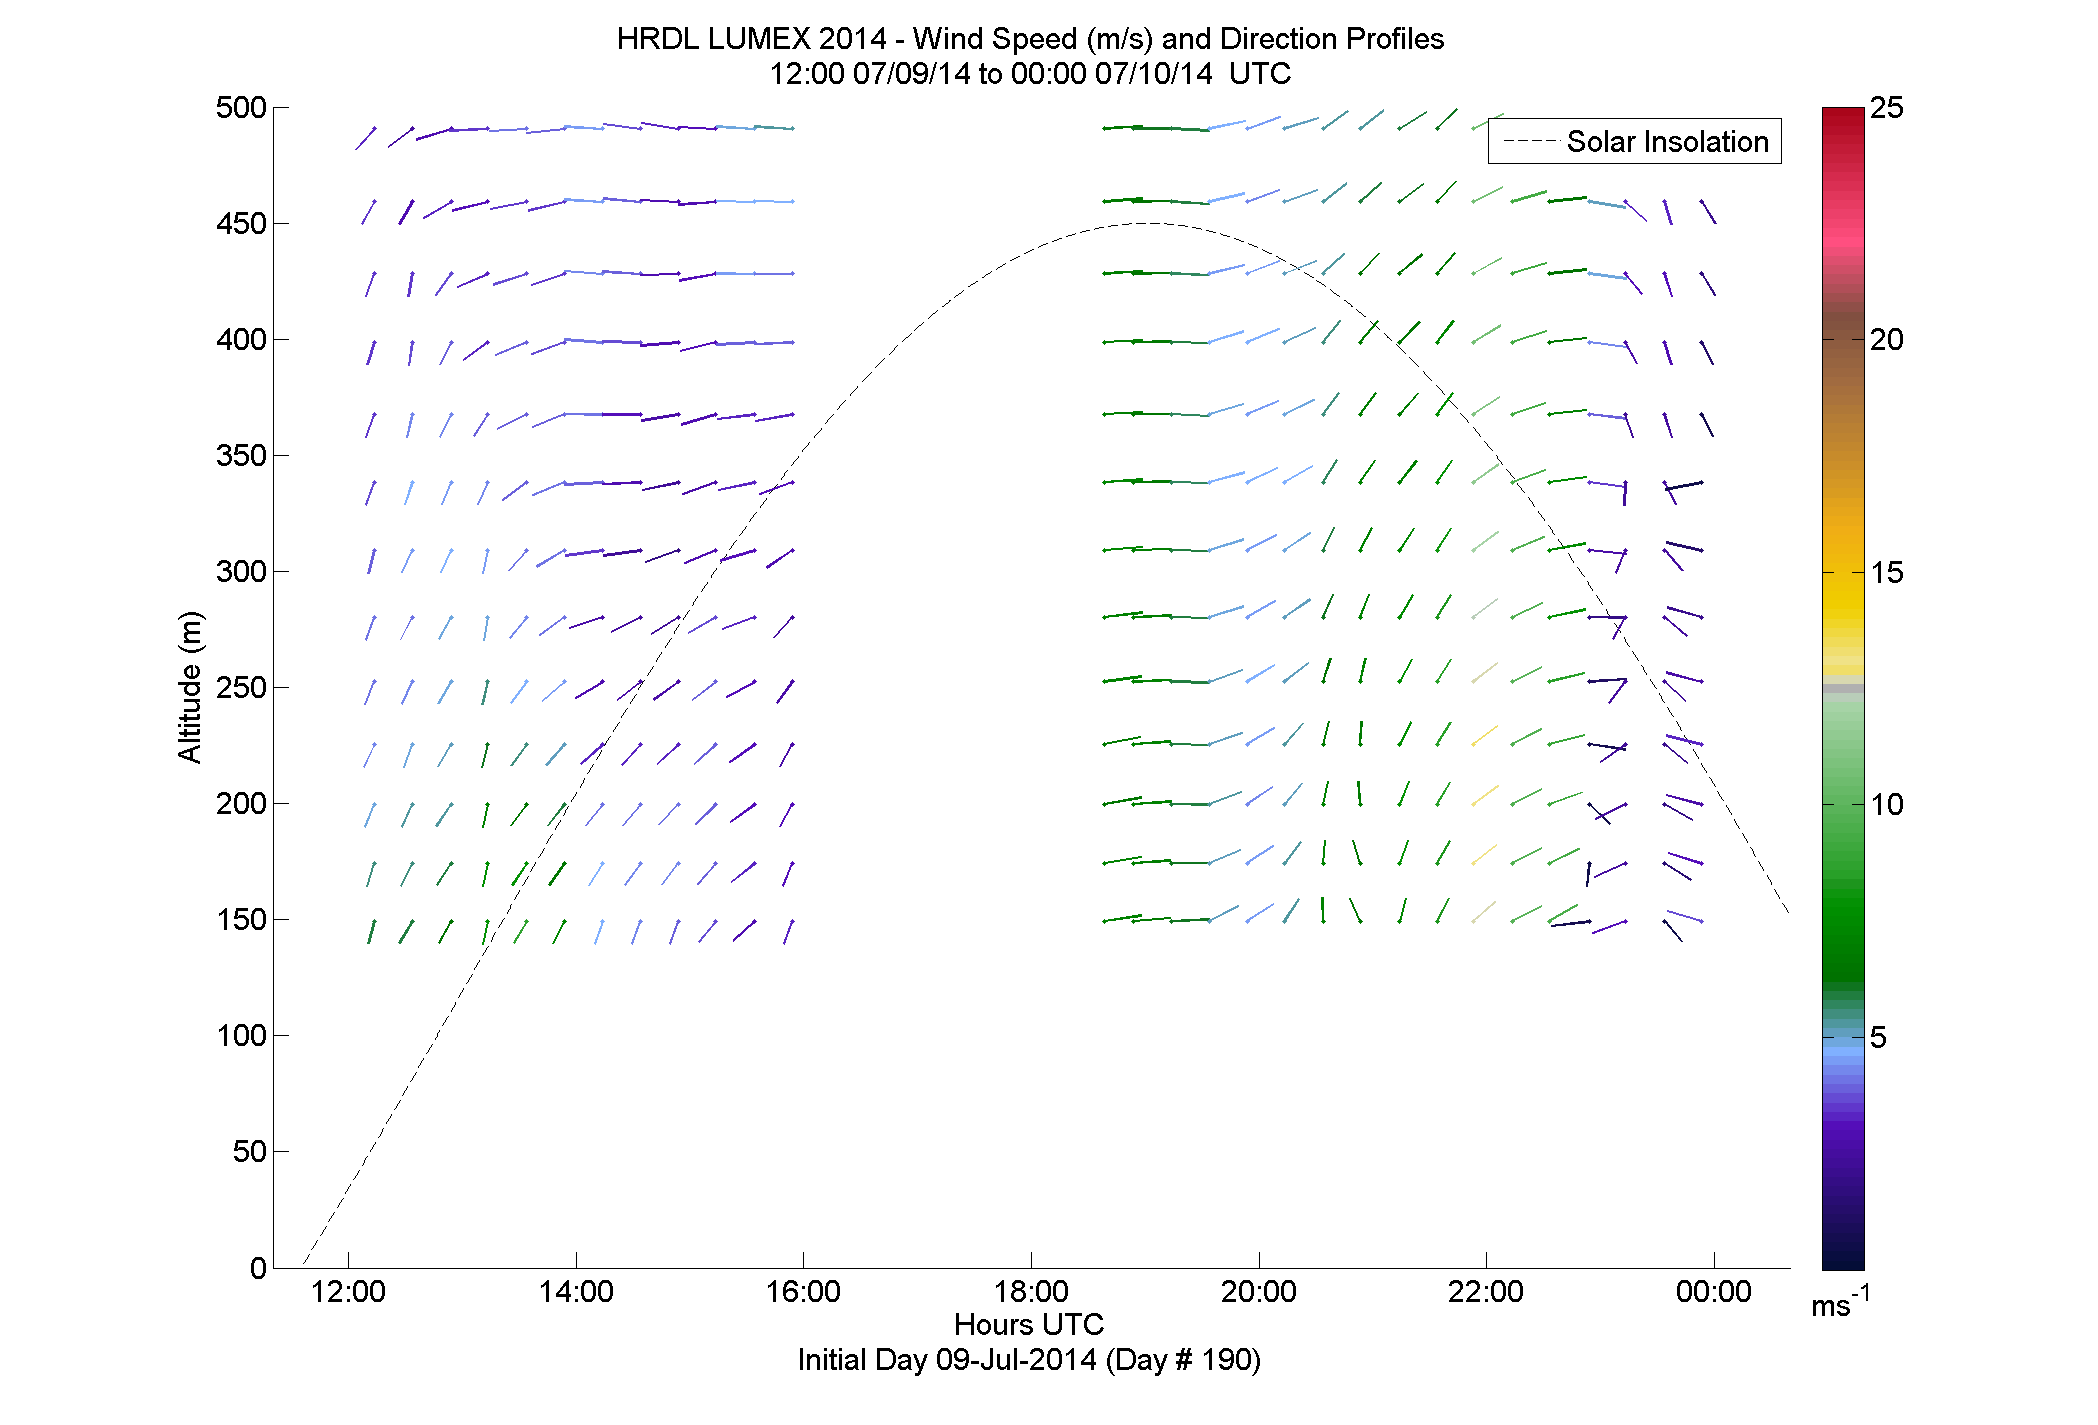 HRDL speed and direction profile - July 9 pm